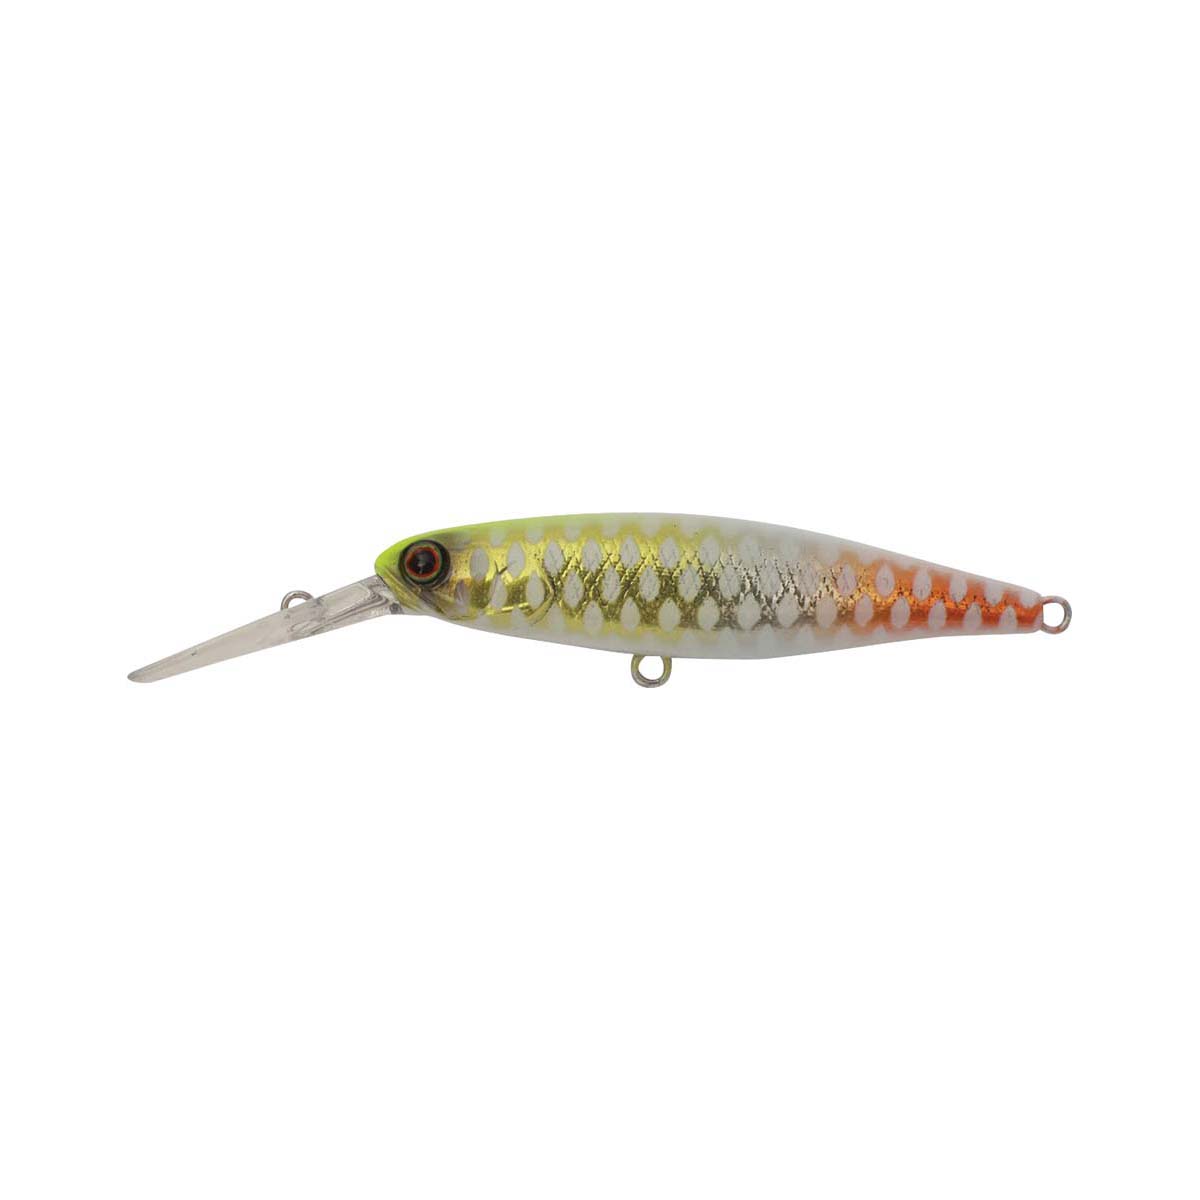 Jackall Squirrel SNT Hard Body Lure 67mm Stay White